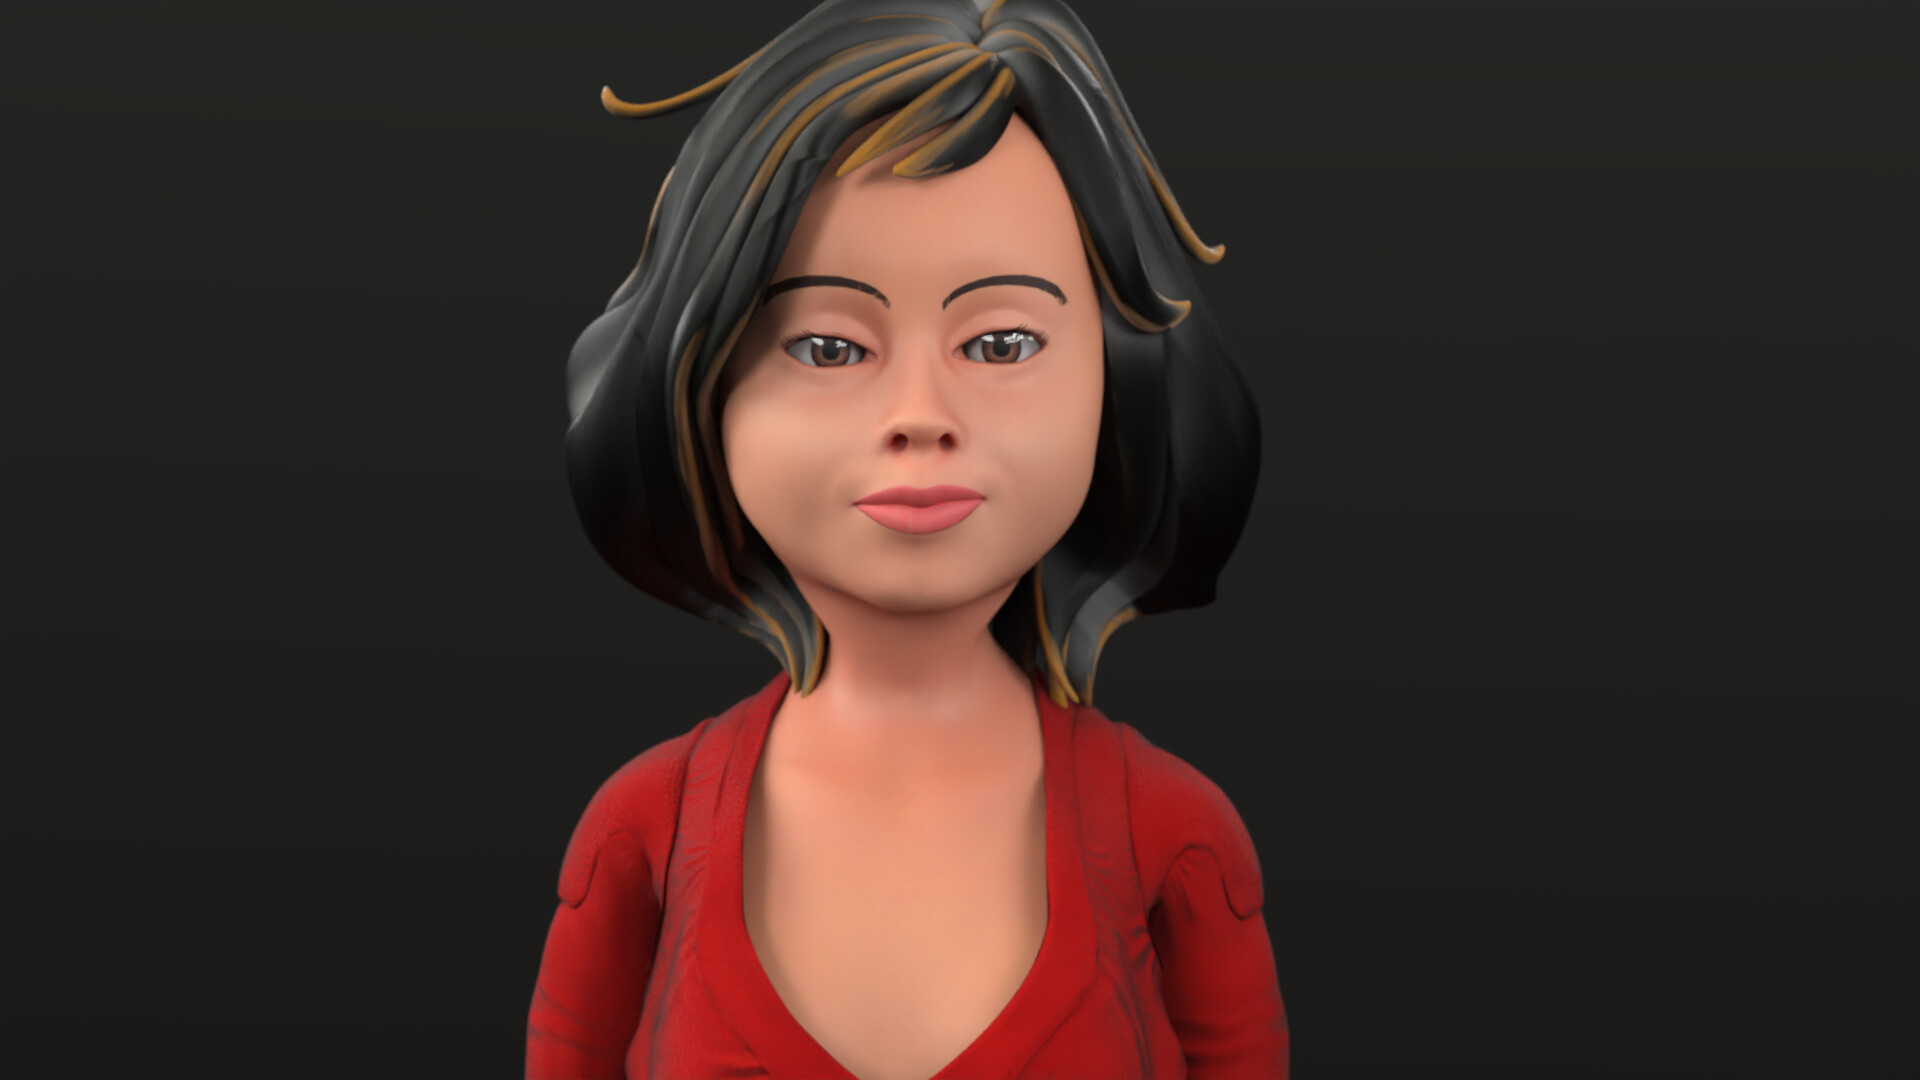 ArtStation - 3D Cartoon Character for Animation or video games with  cimematic look